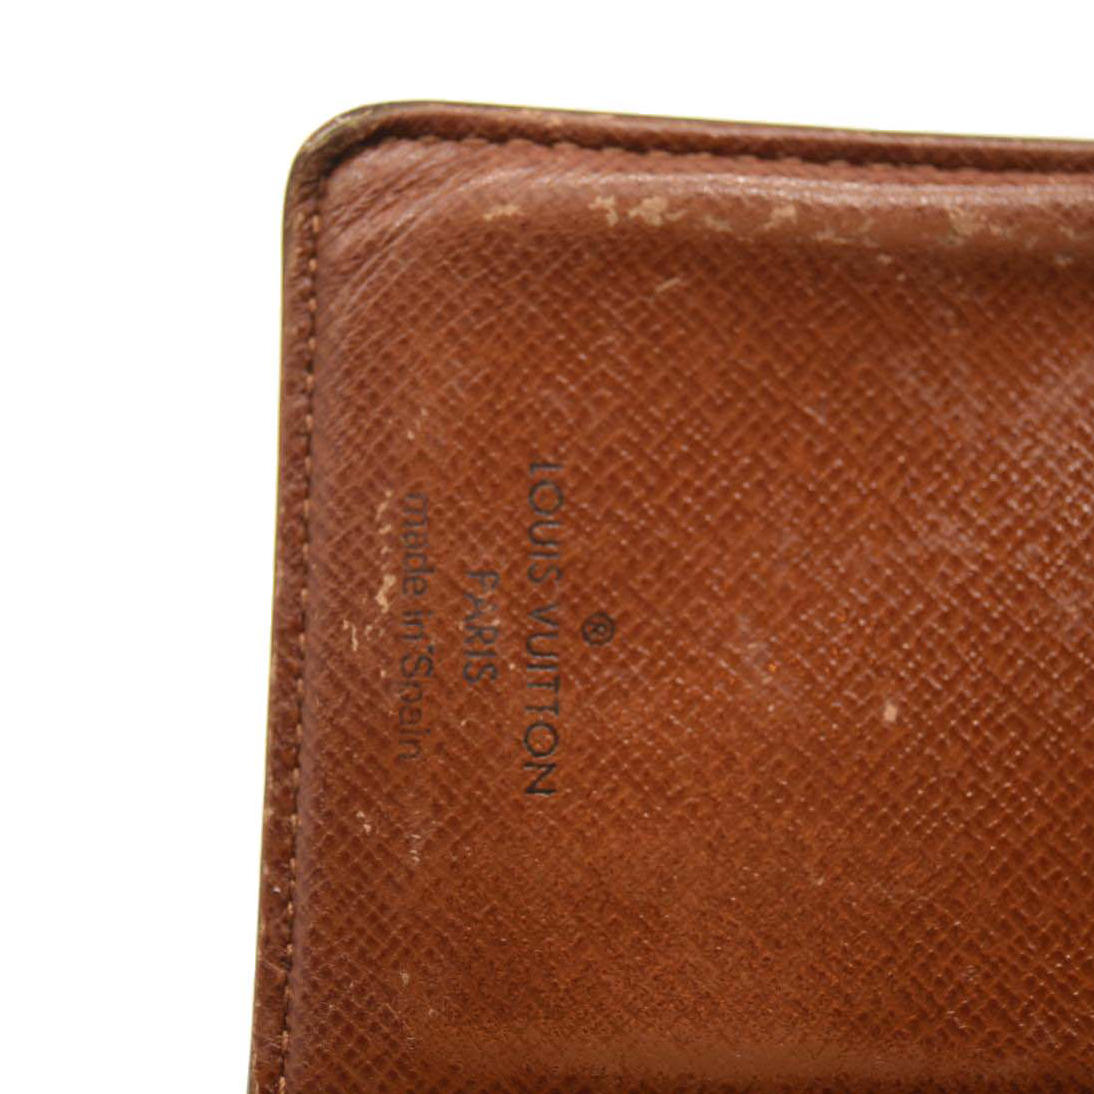 USED Louis Vuitton Monogram French Purse Wallet CA0012